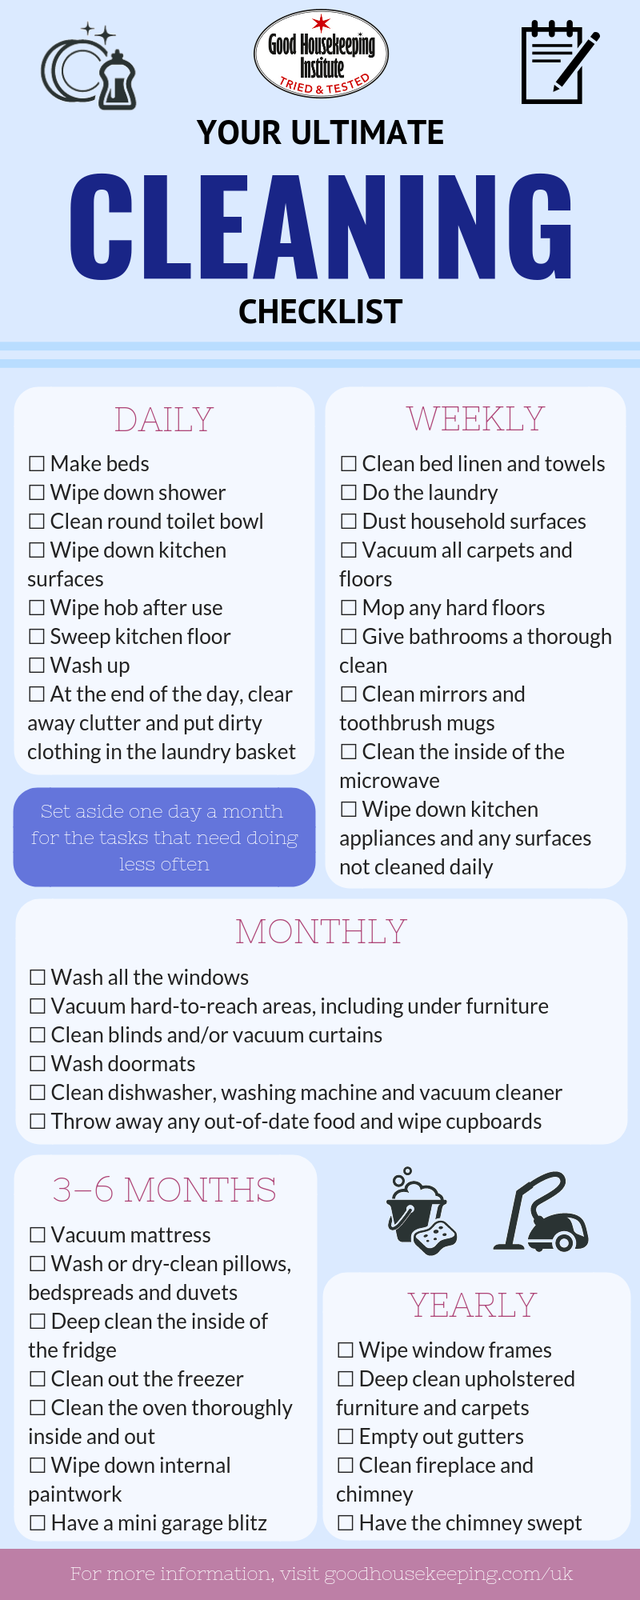 45 UK House Cleaning Facts and Stats You Should Know About